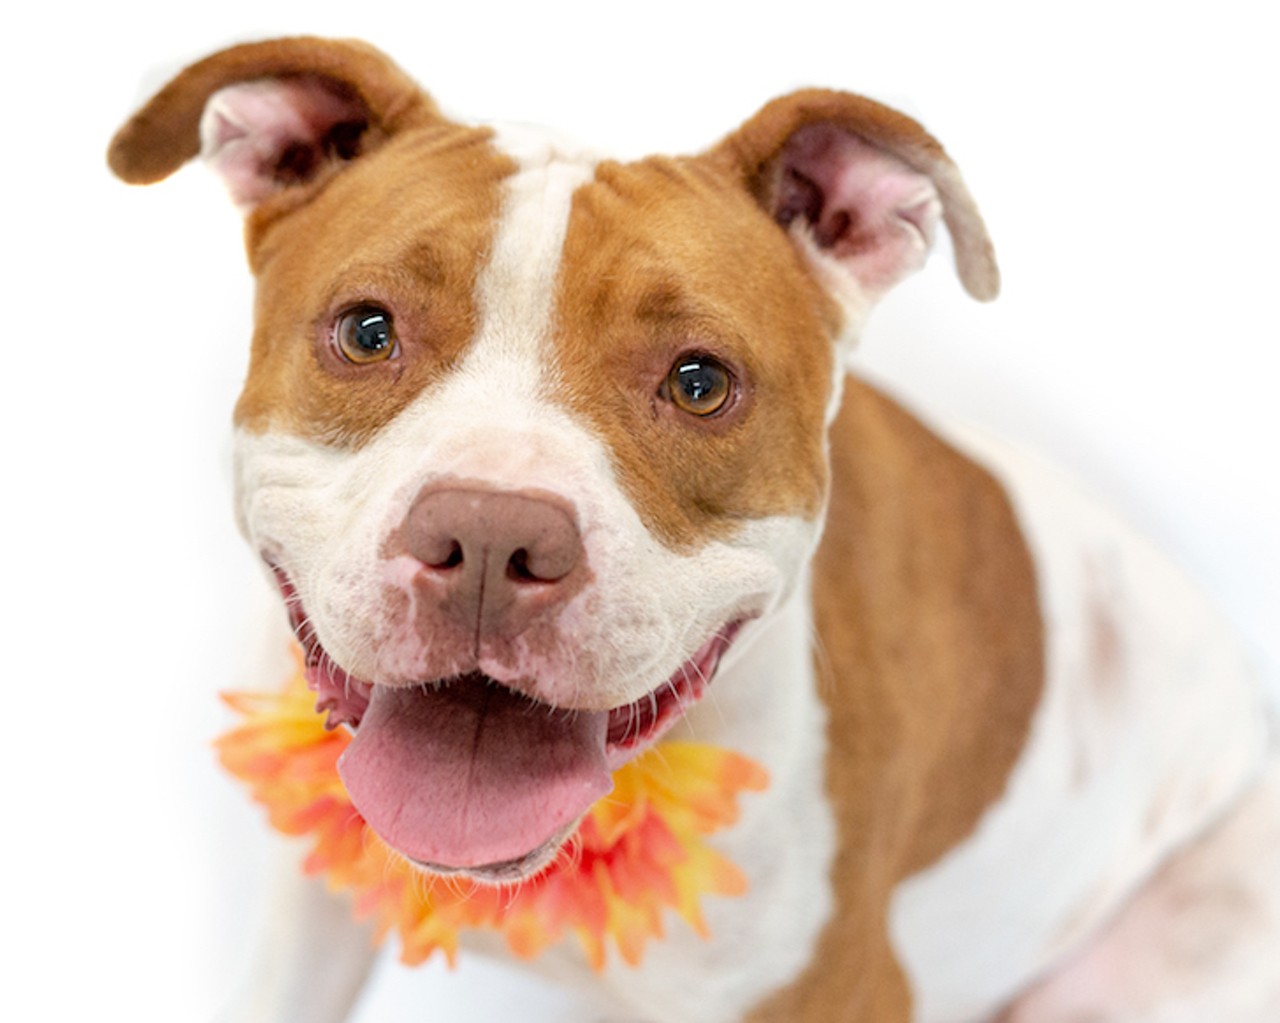 24 adoptable dogs available right now at Orange County Animal Services